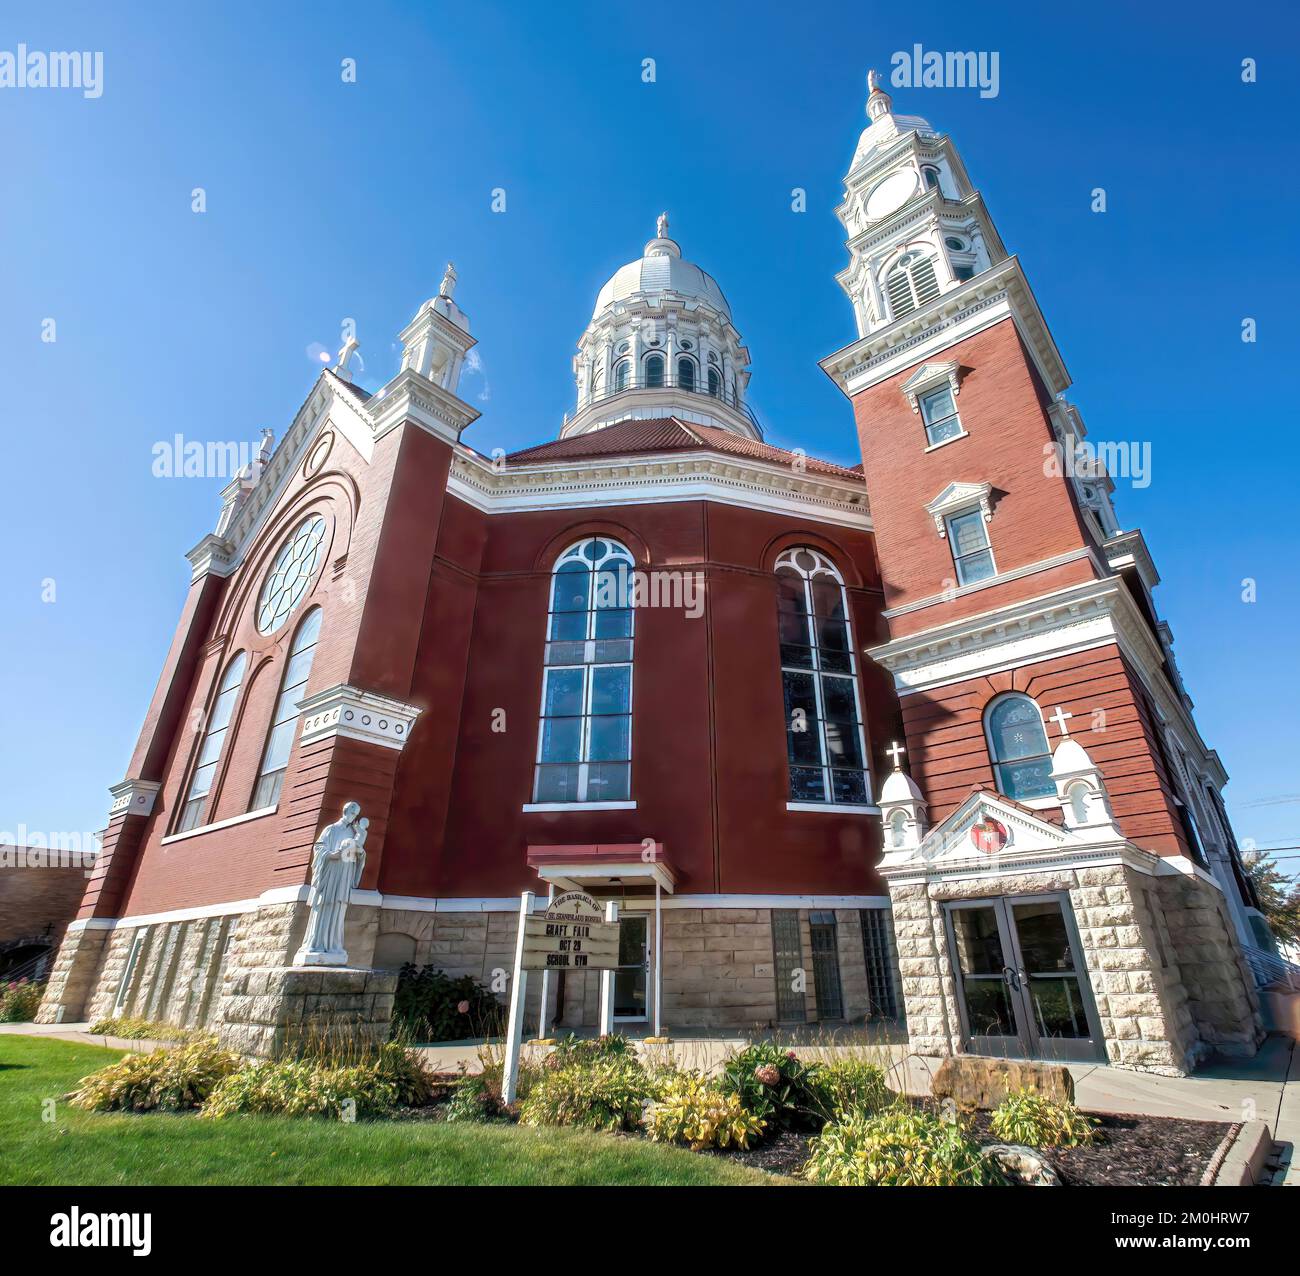 Wide angle view of the historic Basilica of St. Stanislaus Catholic Church built in 1894 in the Polish Cathedral Style in Winona, Minnesota USA. Stock Photo